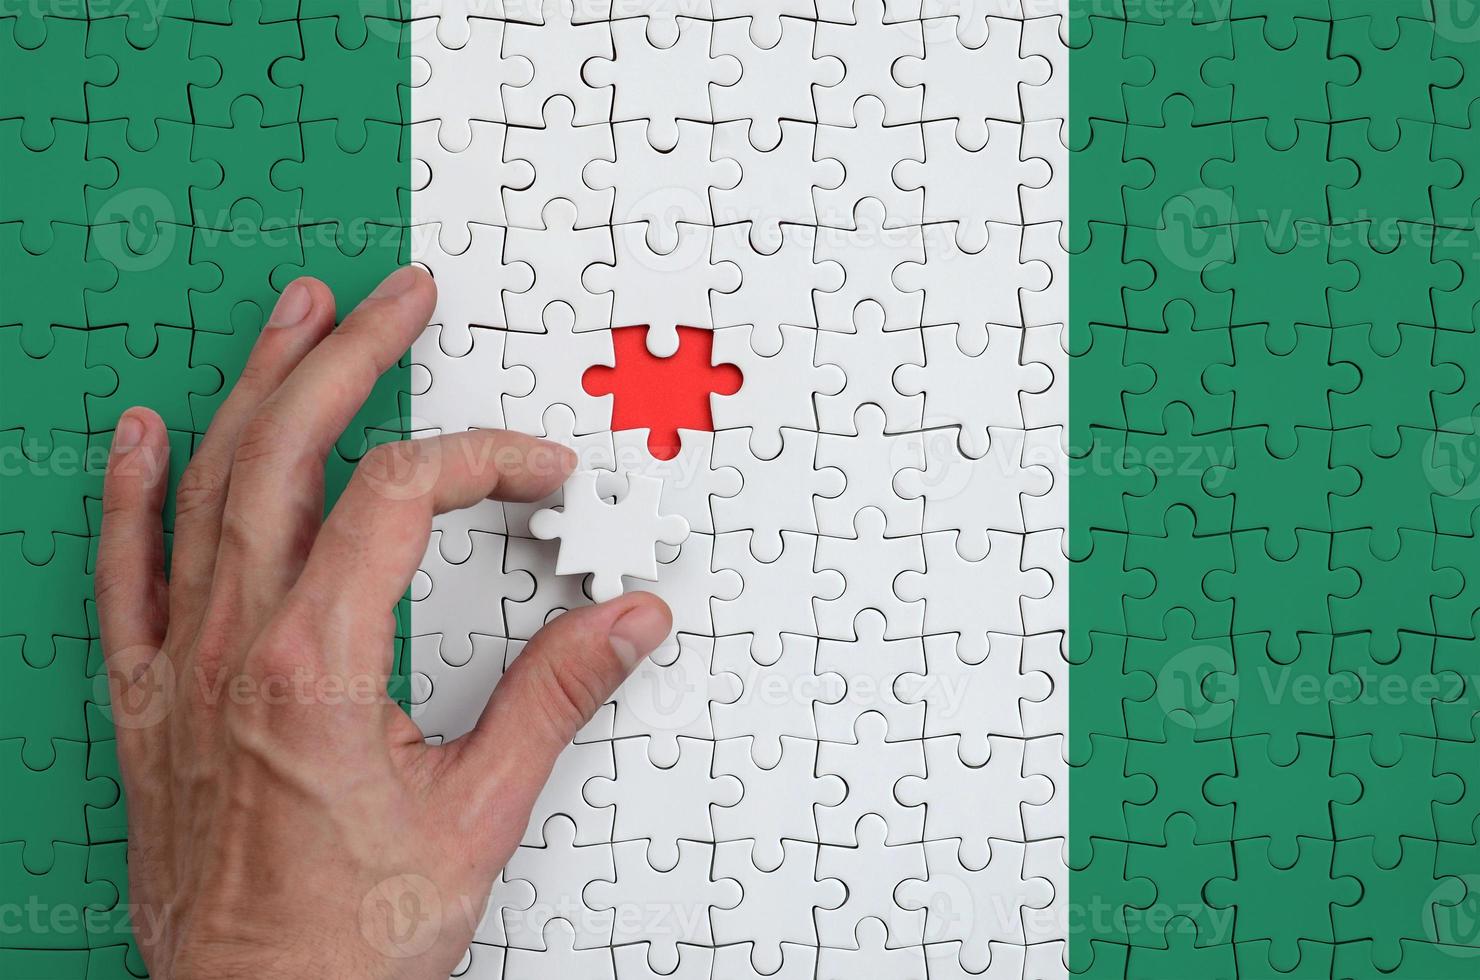 Nigeria flag is depicted on a puzzle, which the man's hand completes to fold photo